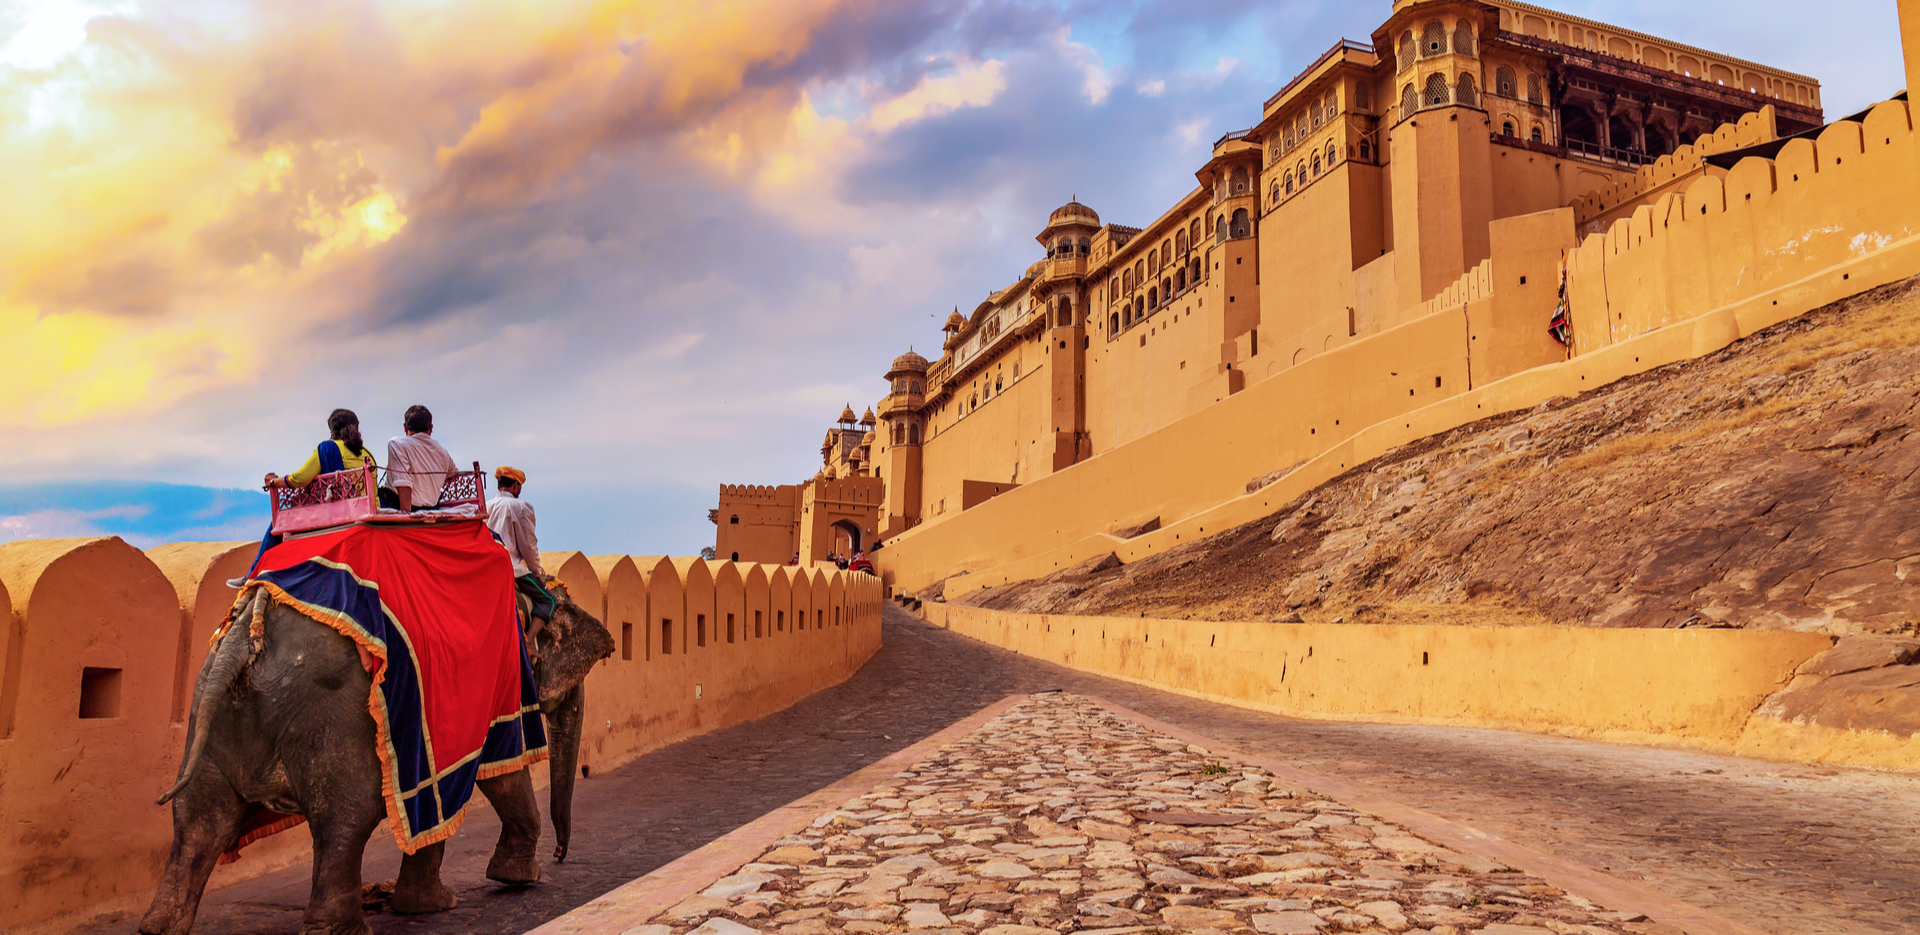 Jaipur Fort And Palace Tour Packages